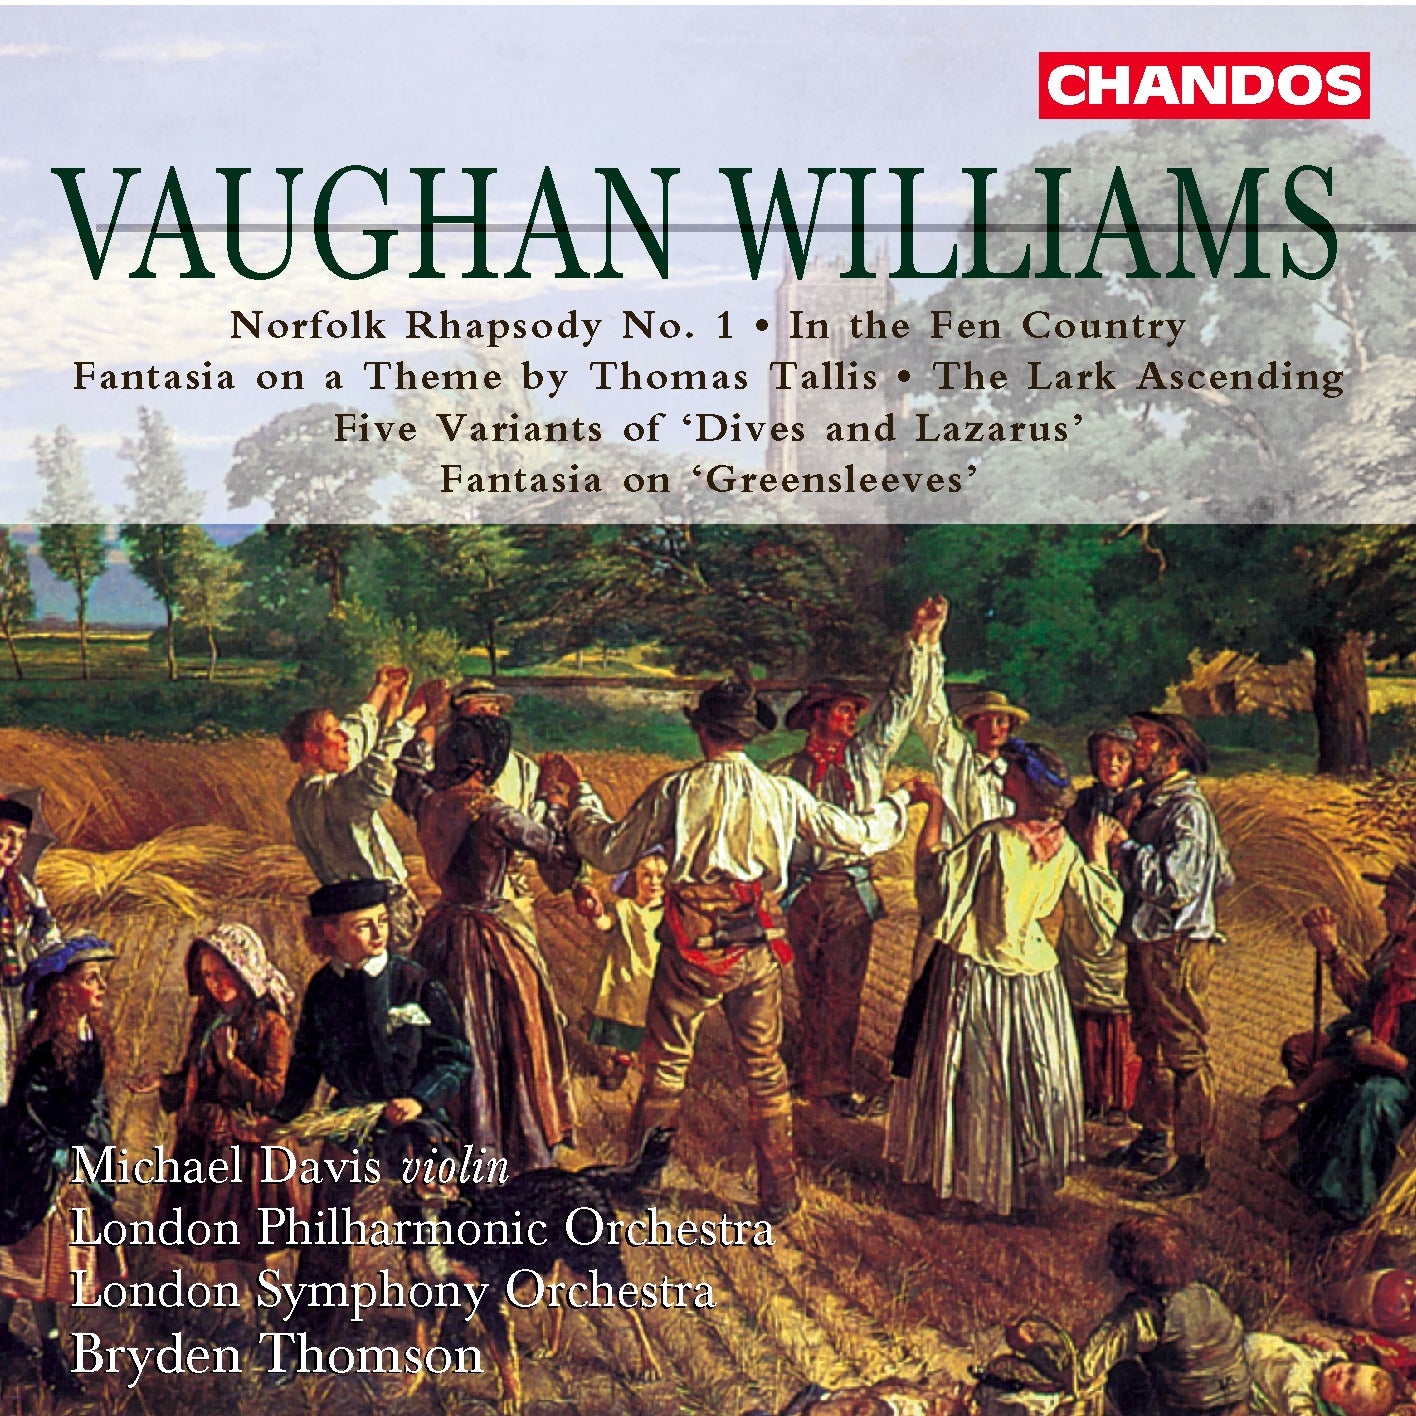 Vaughan Williams: Orchestral Works / Davis, Thompson, LSO, LPO